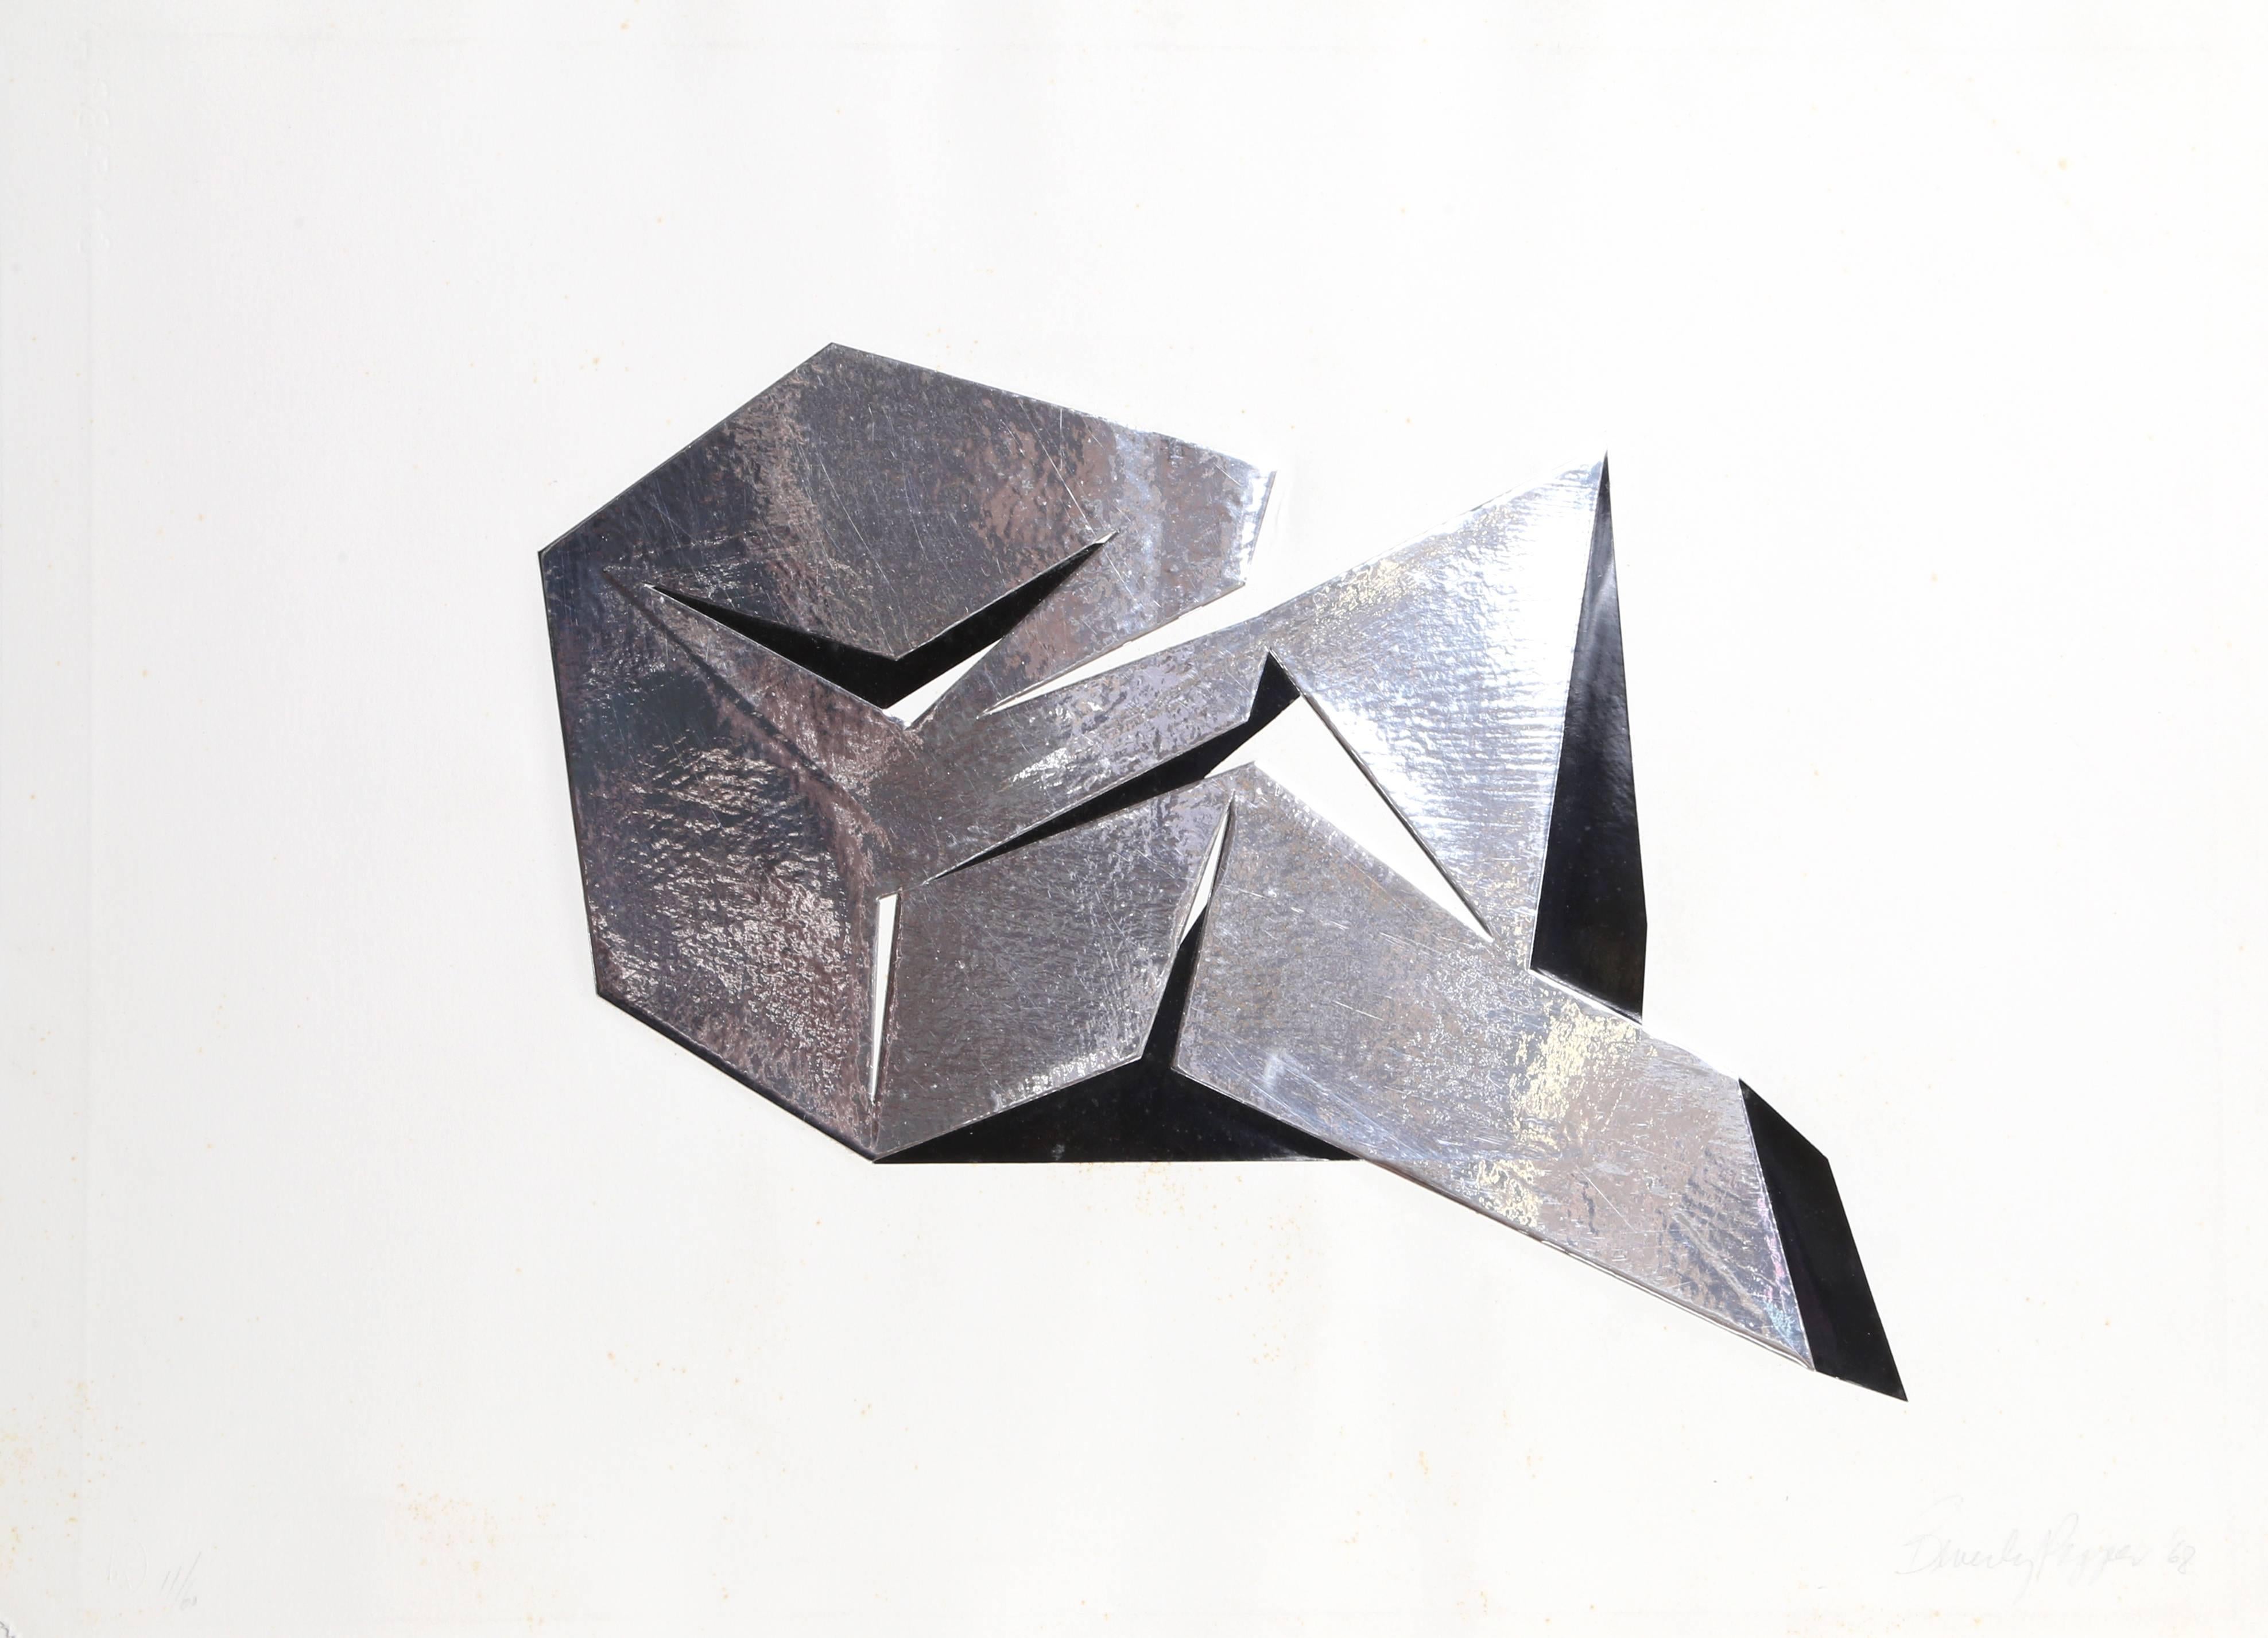 This shiny foil-embossed collage was created by American artist Beverly Pepper (b. 1922). Throughout Pepper's career, she became known for her graceful geometric welded steel sculptures and her interest in boxlike geometric forms, which translates